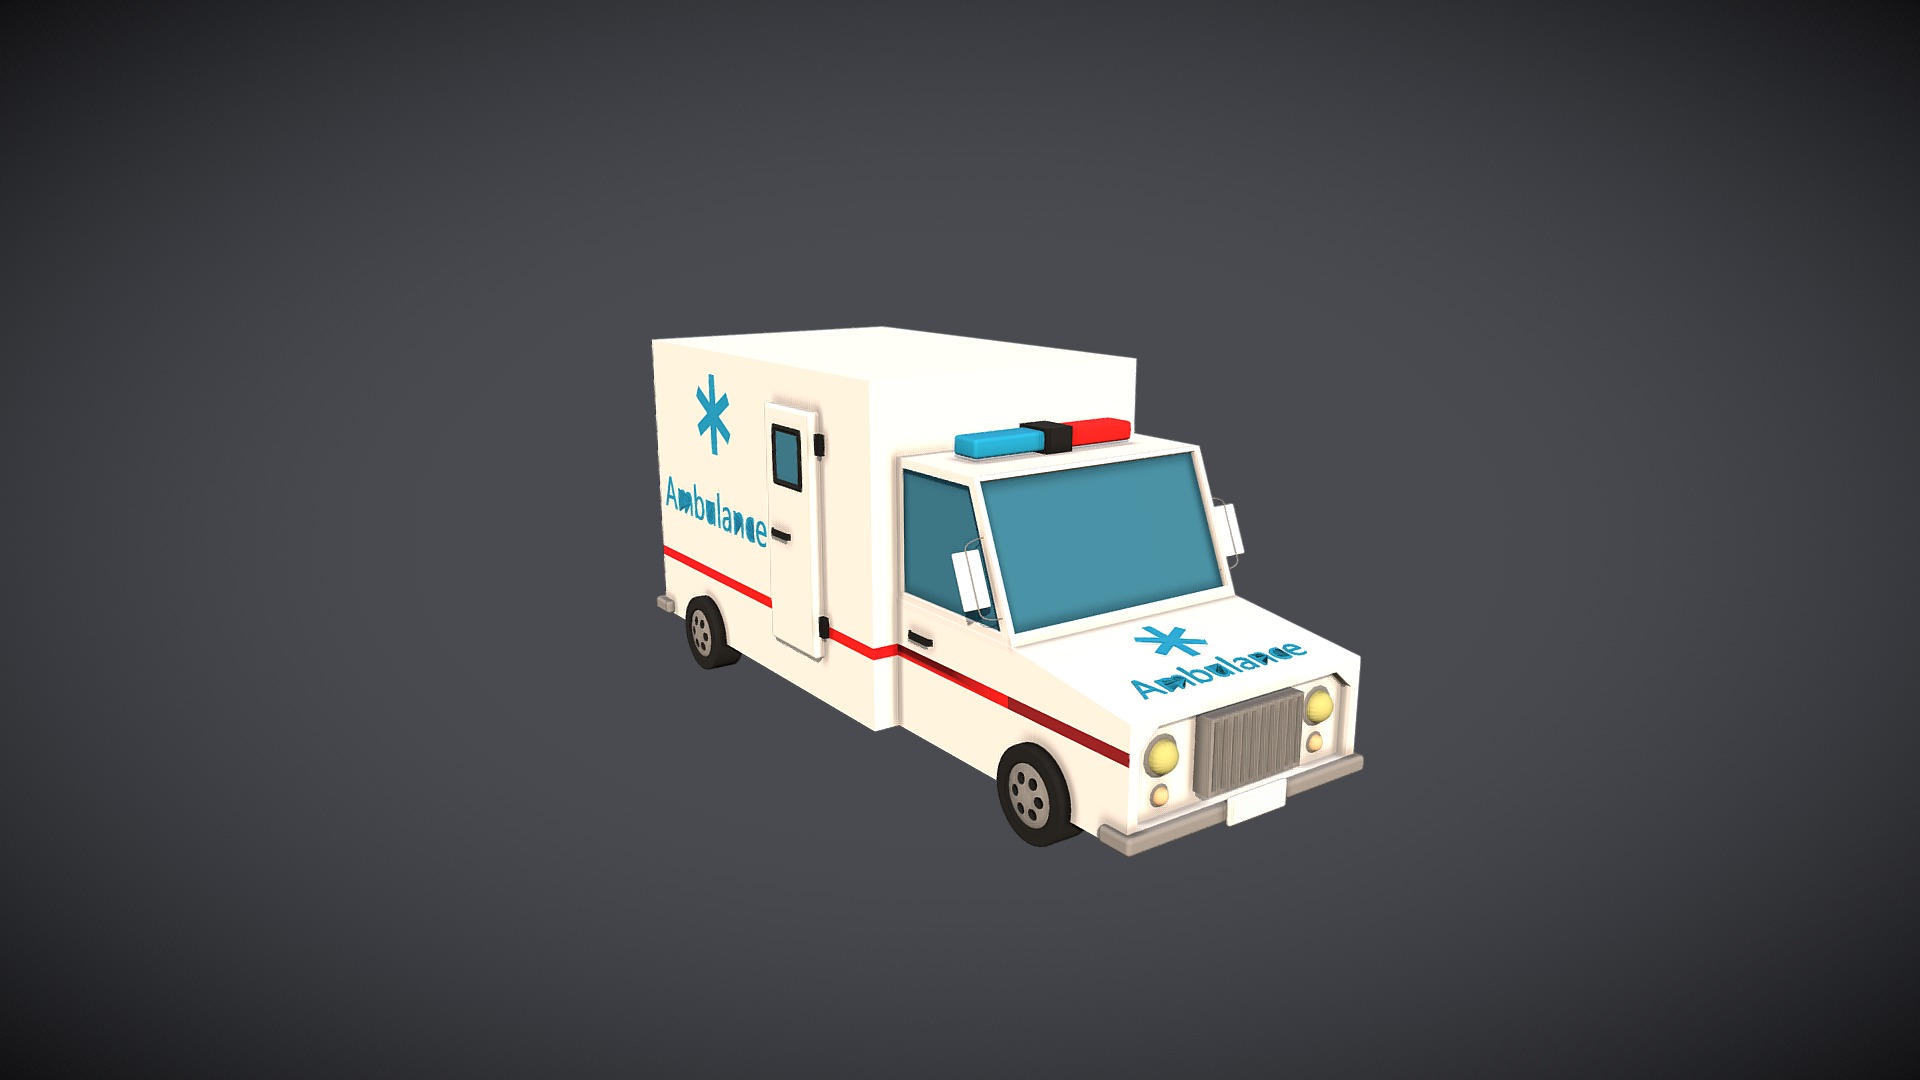 3D model Low-Poly Ambulance - This is a 3D model of the Low-Poly Ambulance. The 3D model is about a white and blue ambulance.